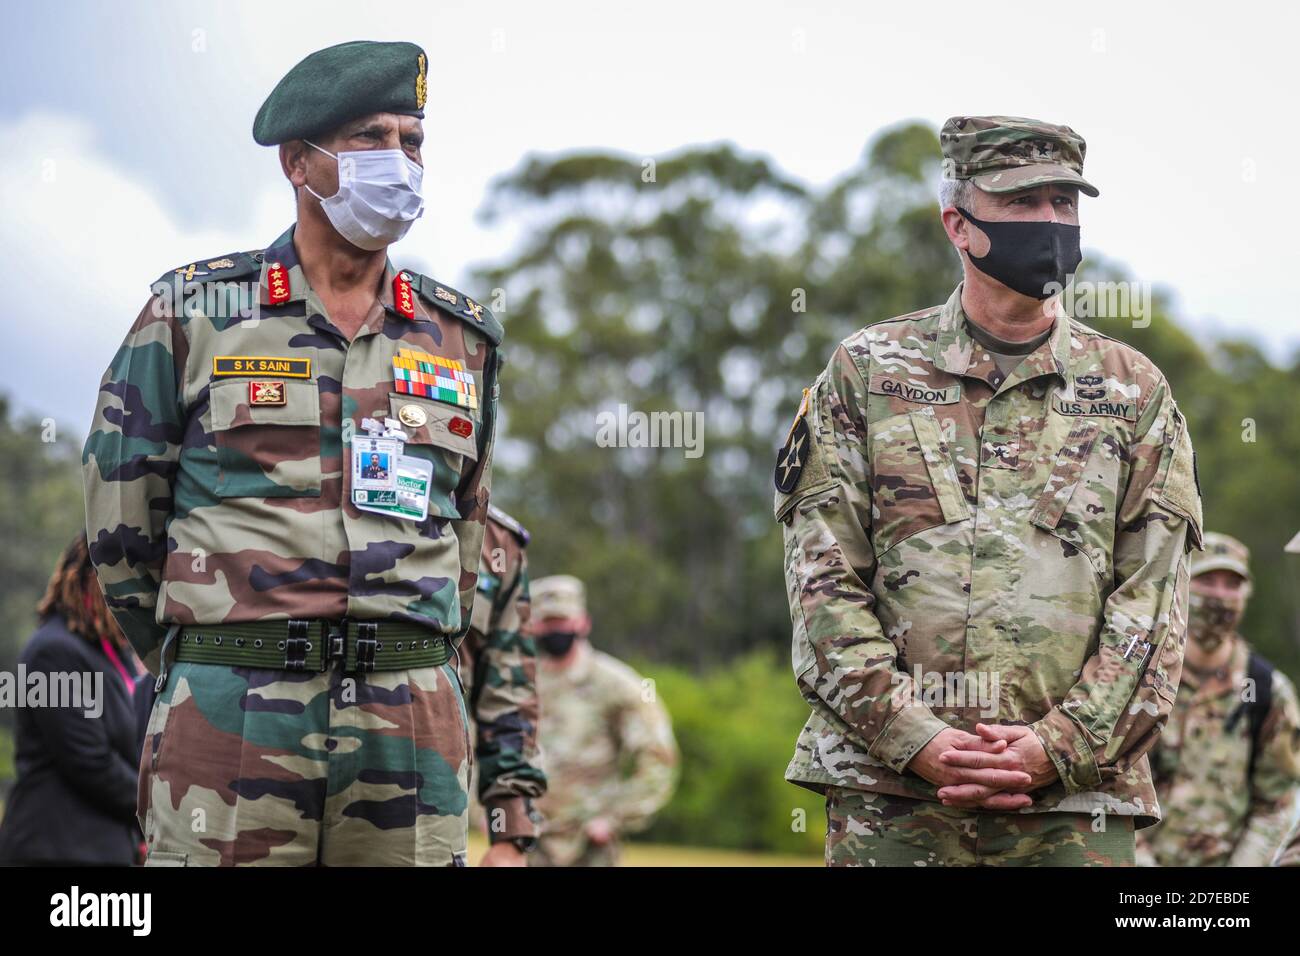 U.S. Army Brigadier General Patrick Gaydon, right, with Indian Army Vice Chief of the Army Staff Lt. Gen. S K Saini,  during a briefing on an air assault operation at Schofield Barracks East Range October 19, 2020 in Honolulu, Hawaii. Stock Photo